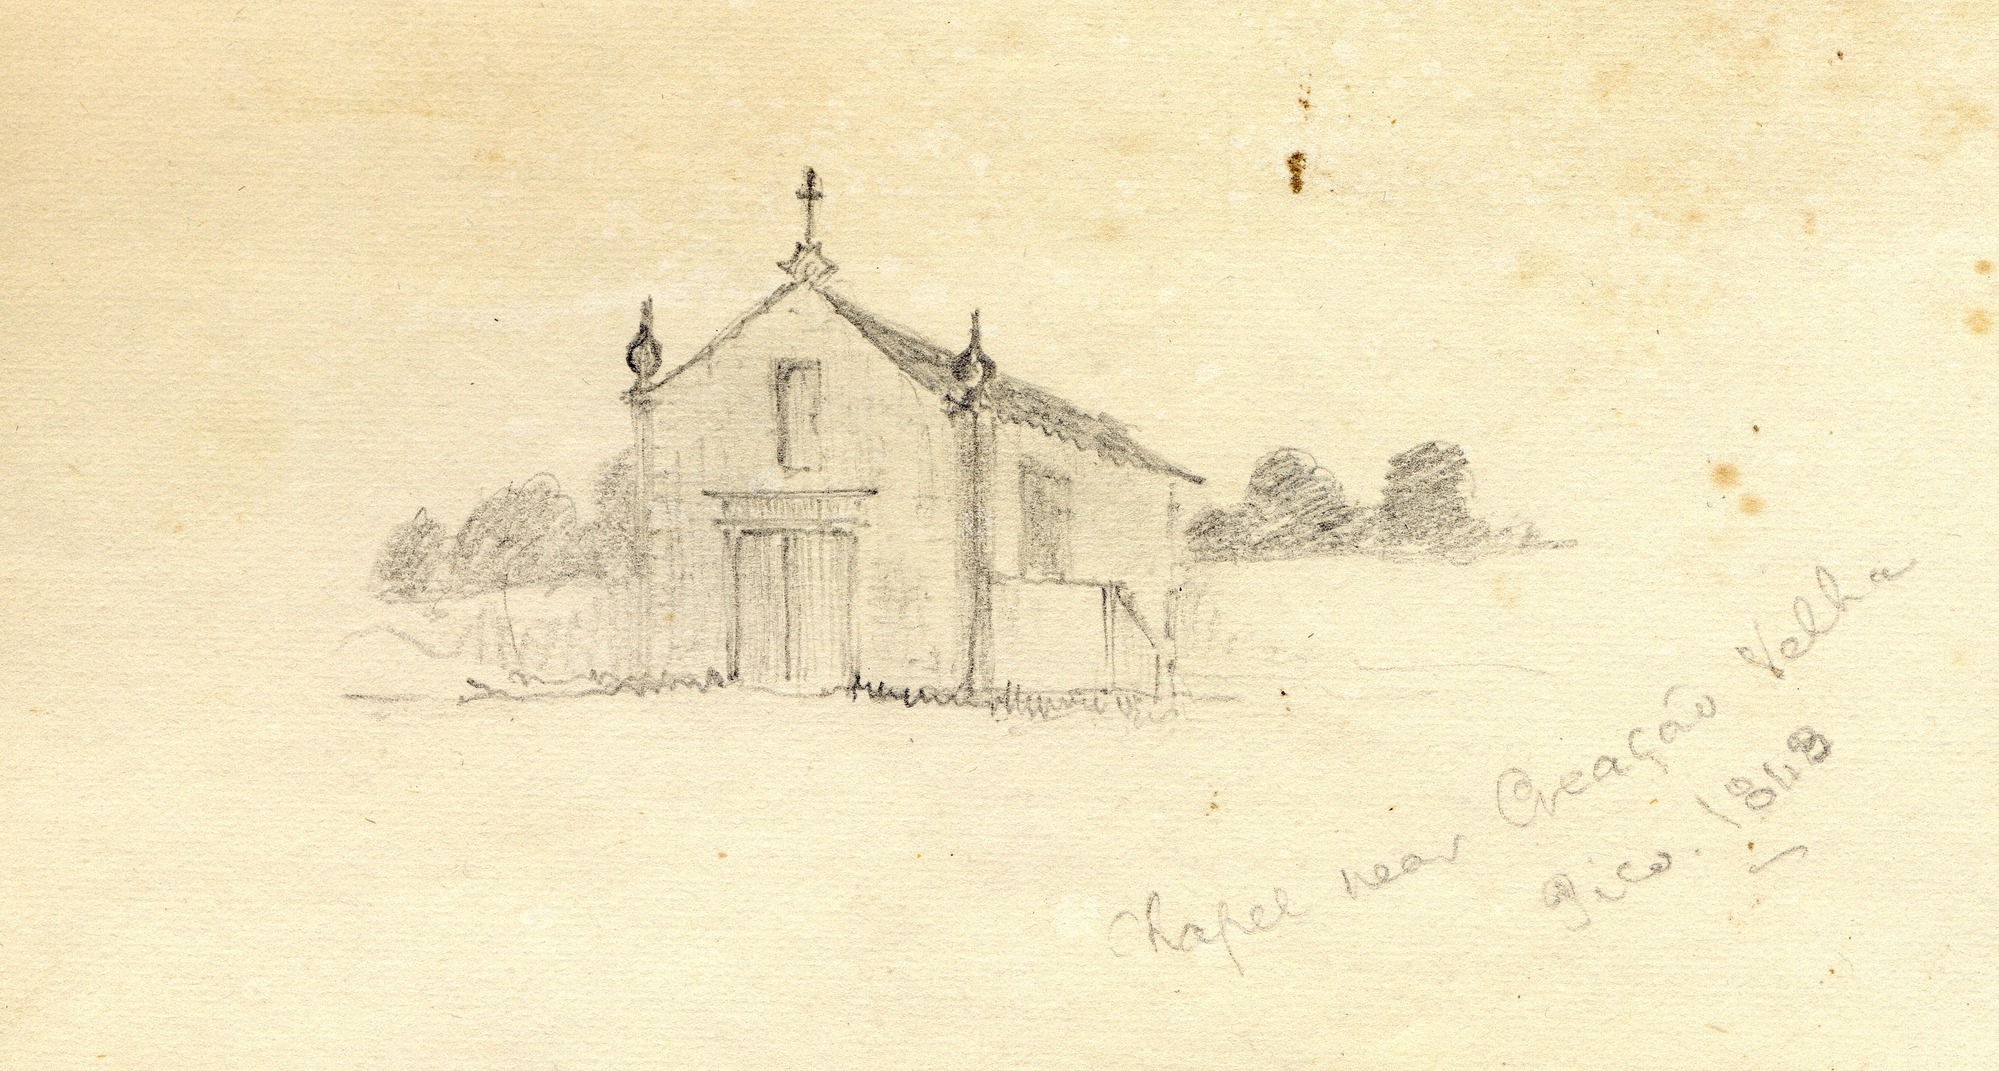 Pencil sketch of building with cross on top of roof.